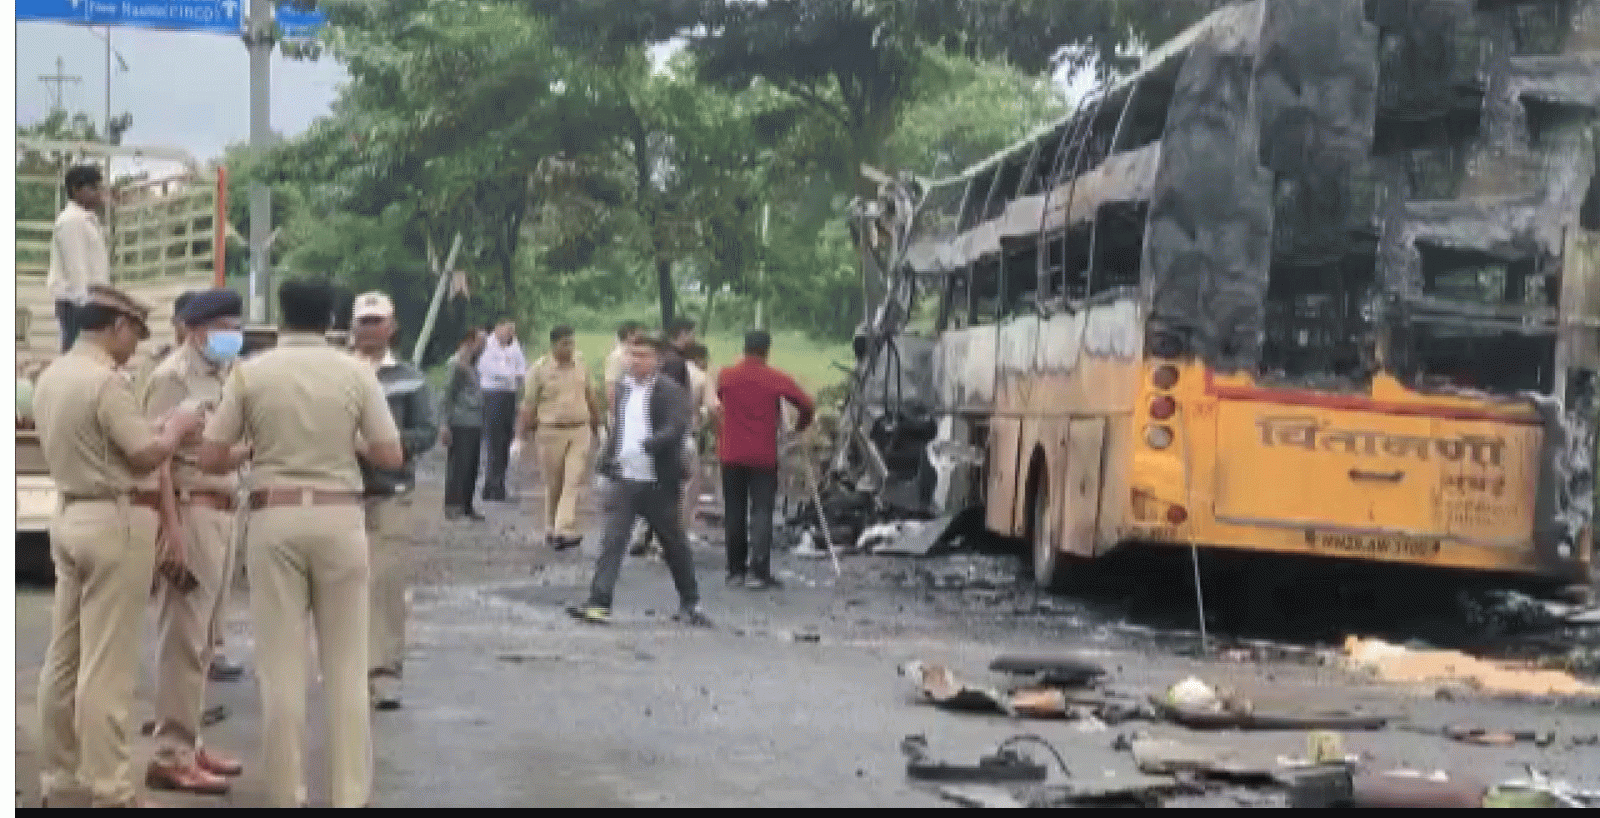 Bus Fire Incident In Nashik